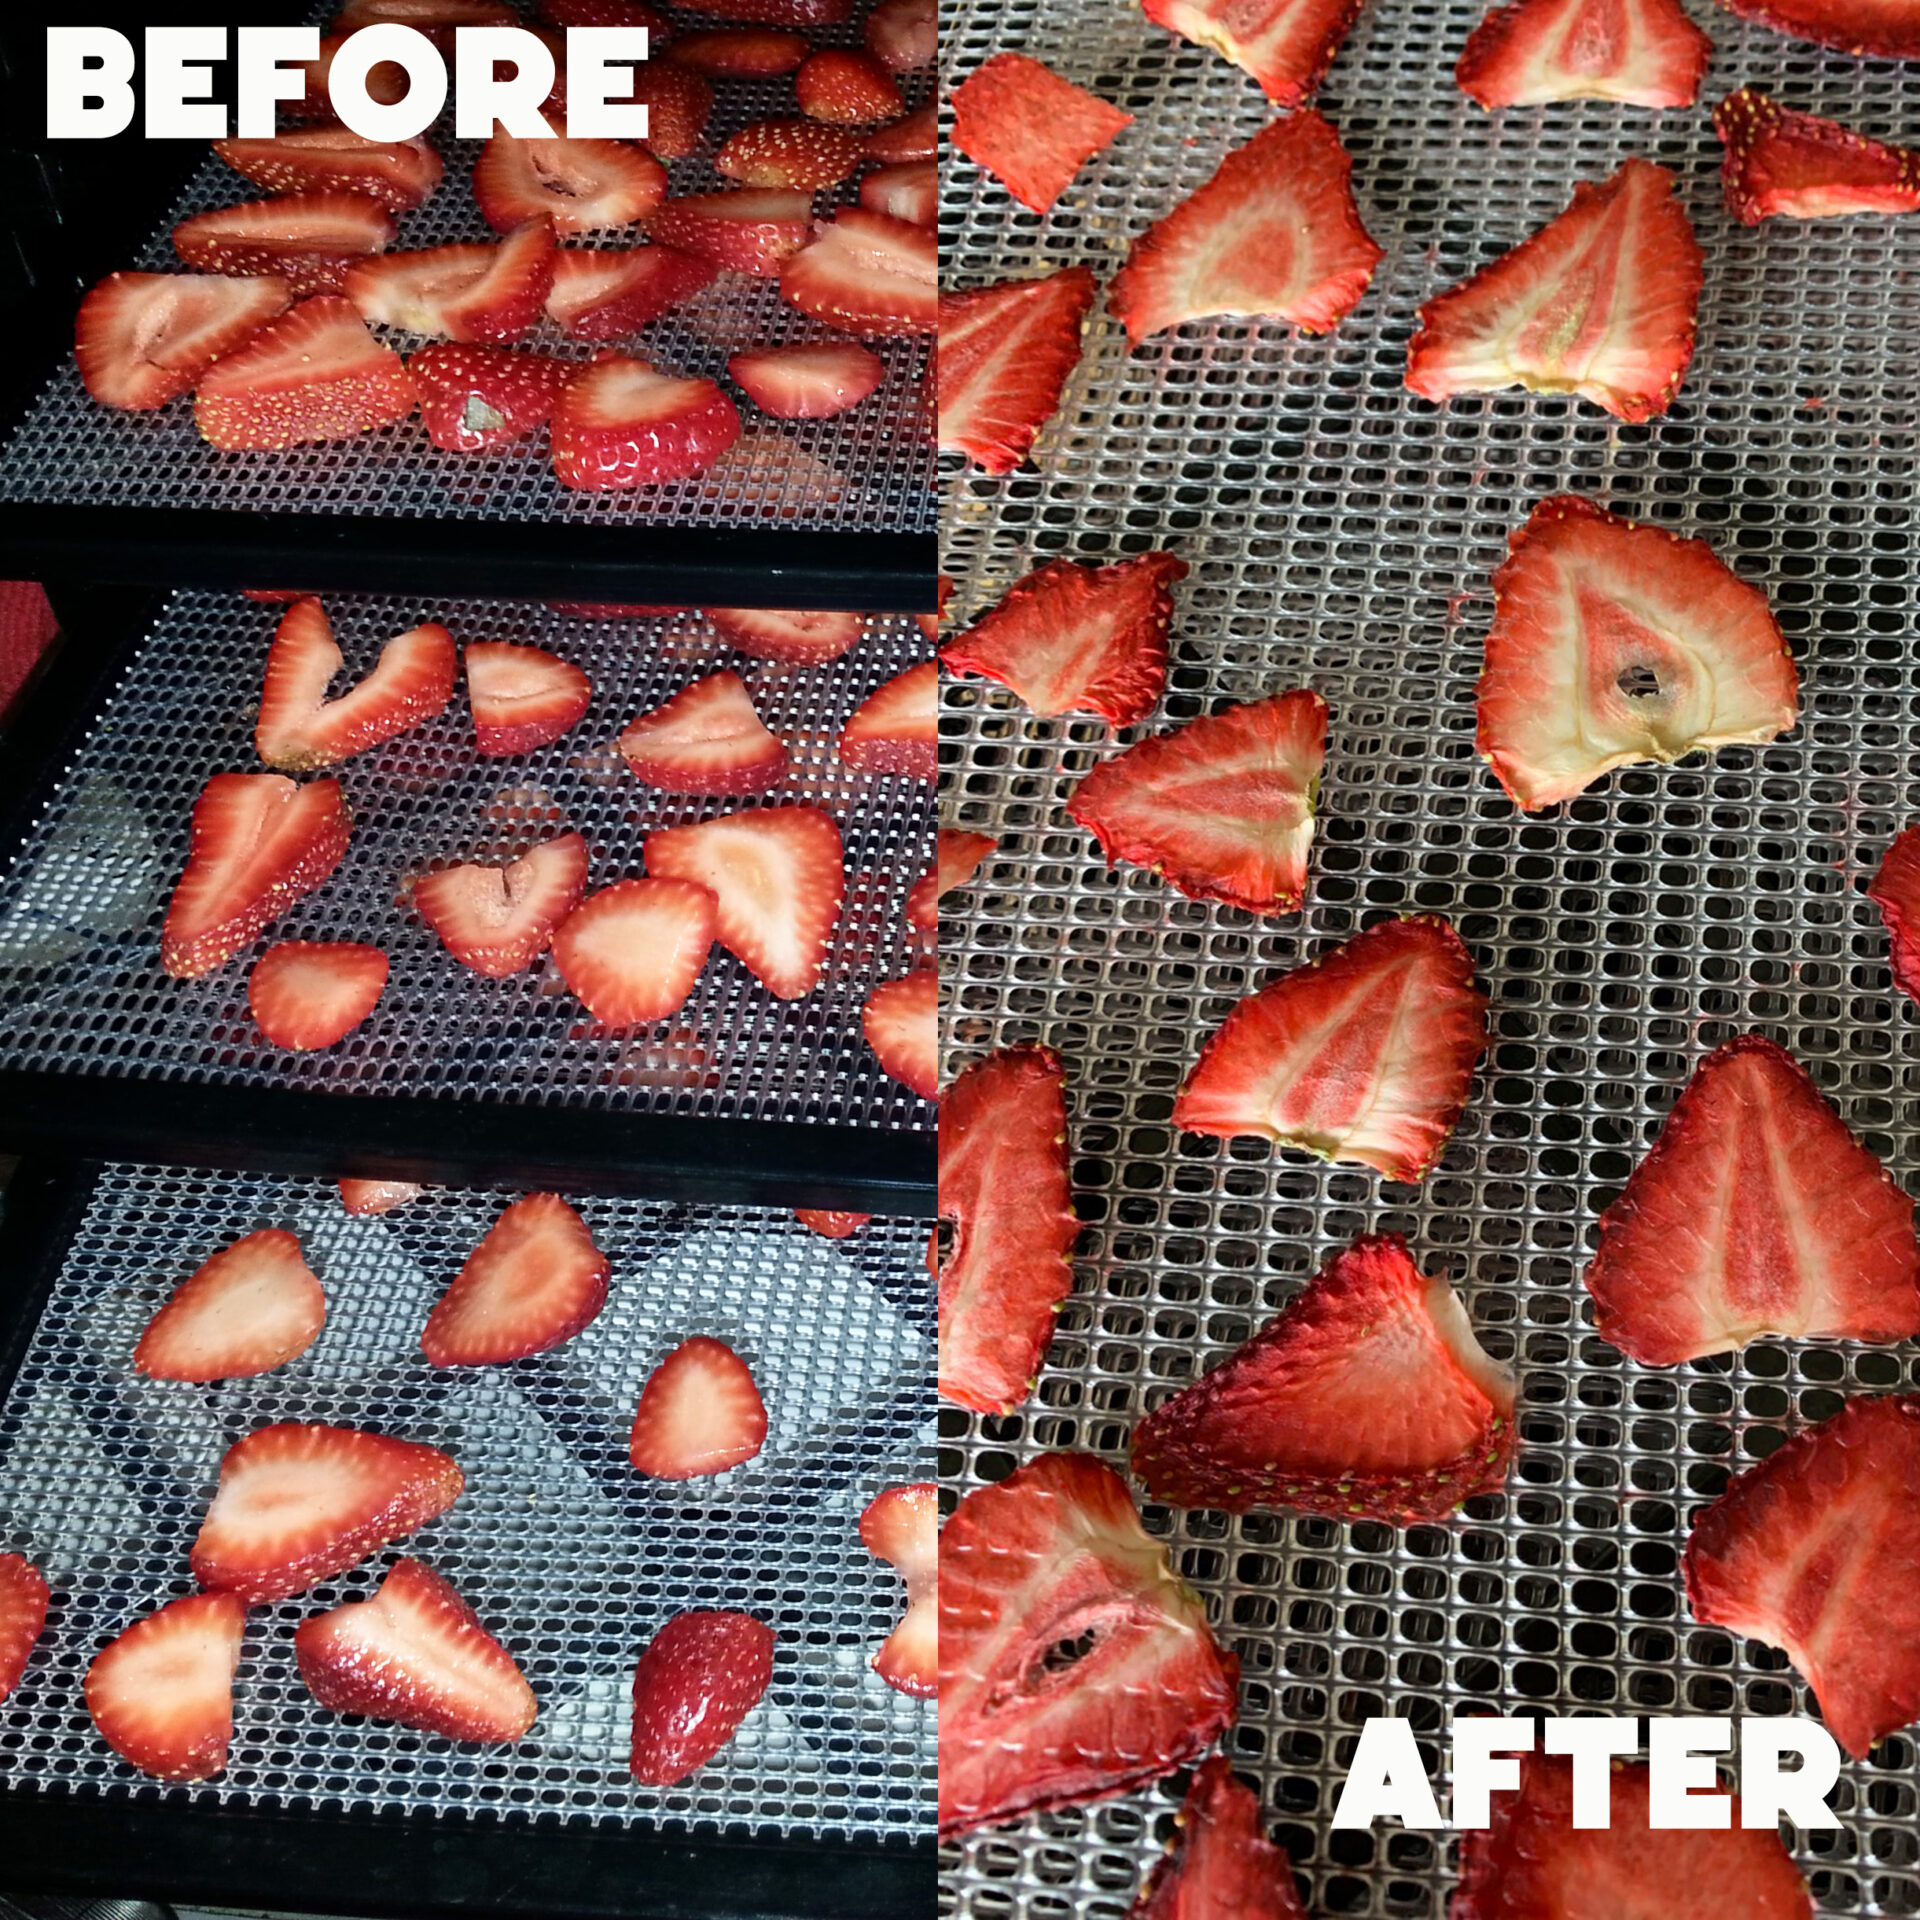 Before and after of drying strawberries